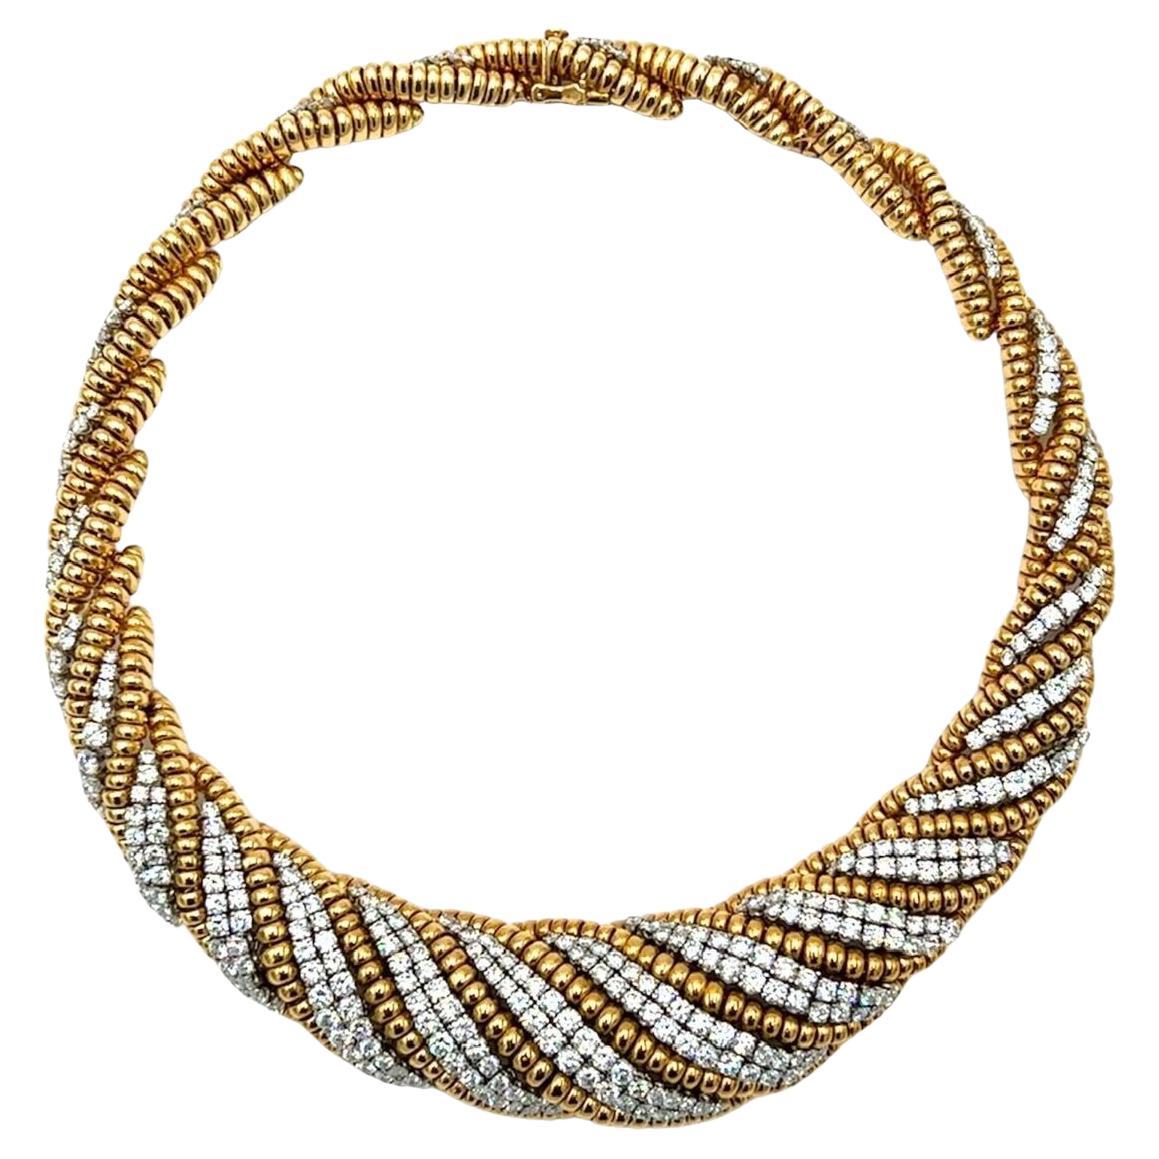 DAVID WEBB Gold, Platinum and Diamond Necklace For Sale